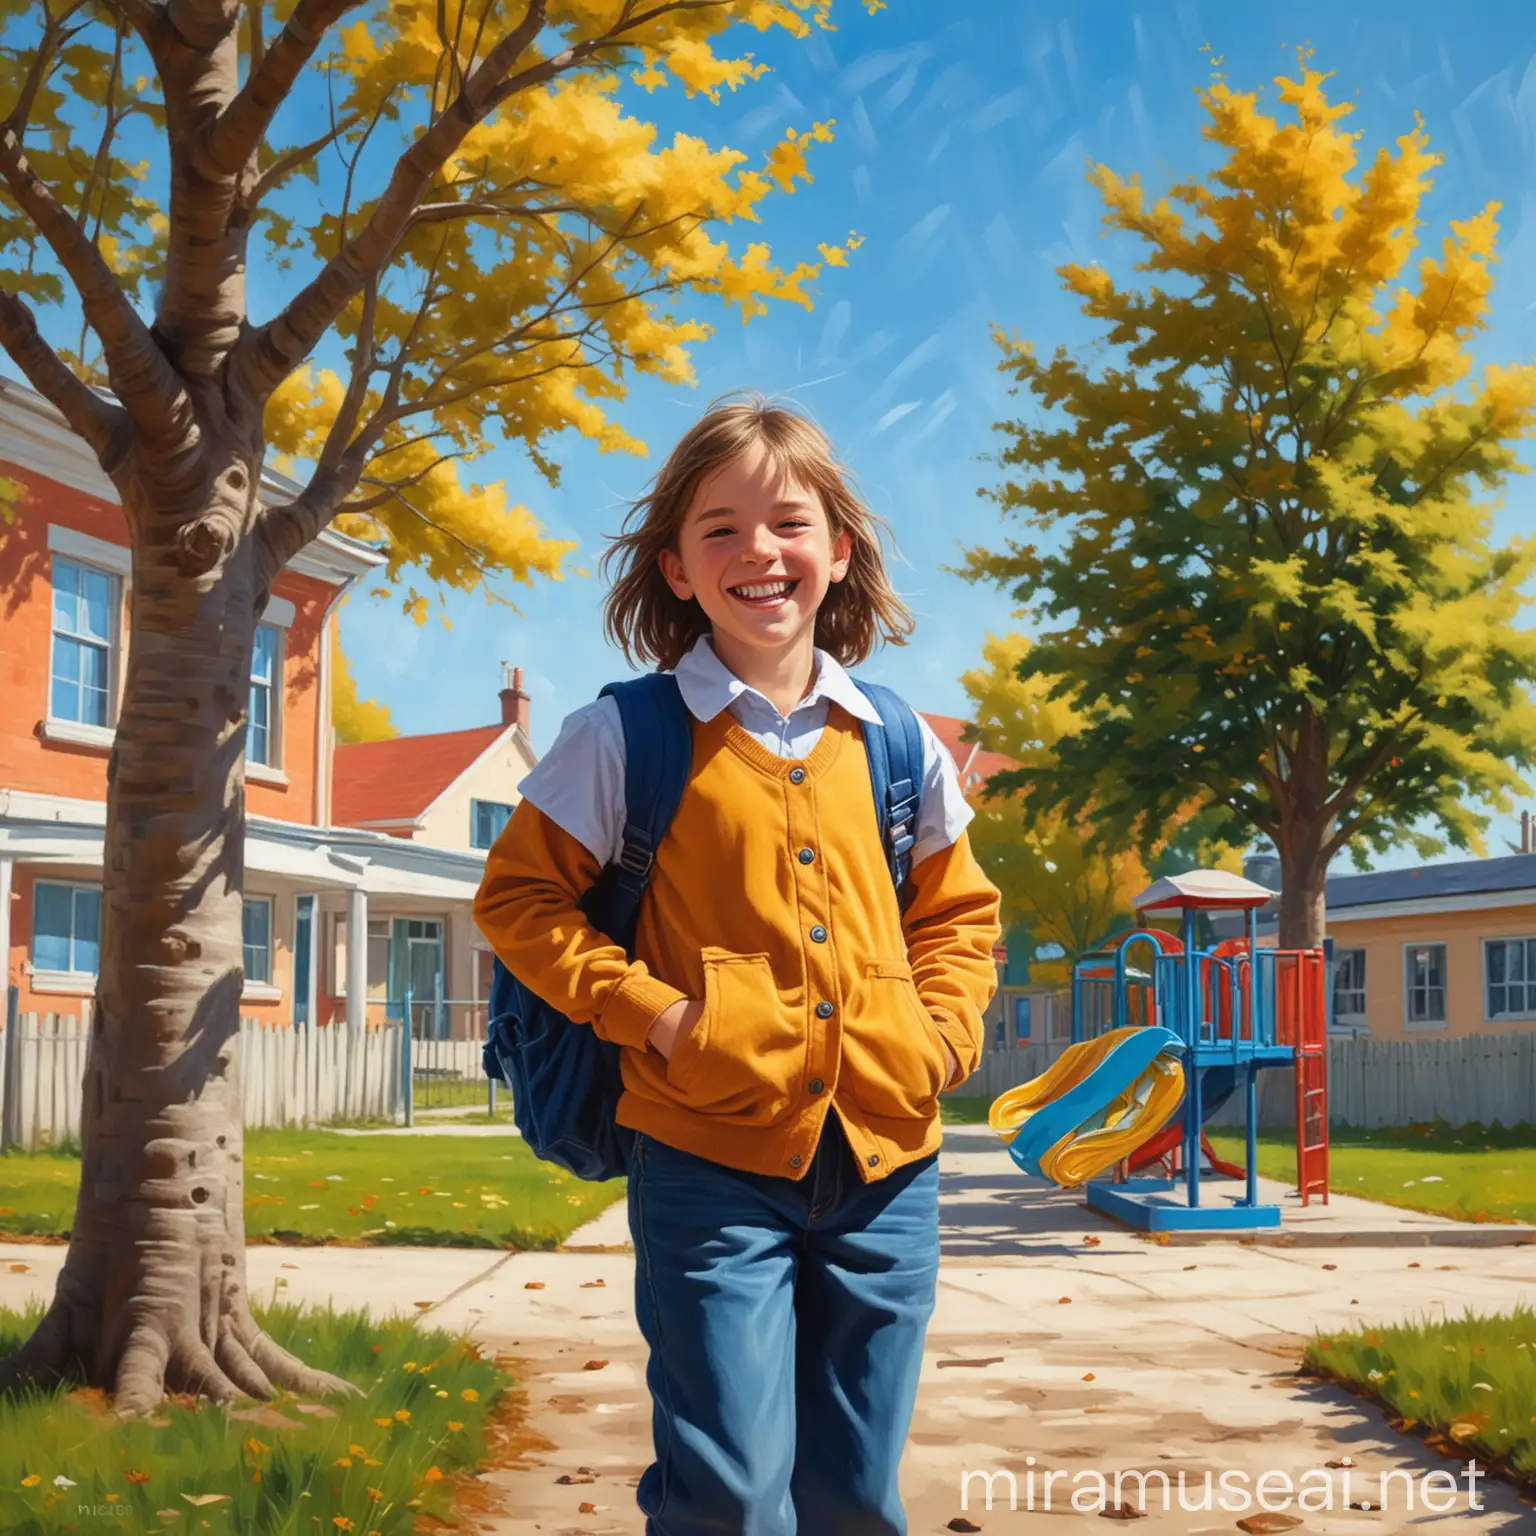 Background: A happy schoolyard with a colorful playground, bright blue sky and some trees in the background.
Child: A child about 10 years old, possibly a girl or a boy, with short or shoulder-length hair that flows slightly in the wind.
Clothing: Wears a colorful school uniform or casual clothing, such as a t-shirt and jeans.
Pose: The child stands happily, perhaps with a backpack on his back and a few school books in his hands.
Facial expression: A broad, happy smile that reflects the joy and carefree nature of everyday school life.
Style: The whole is in the style of an oil painting, with soft brush strokes and rich colors that emphasize the cheerful and lively atmosphere.